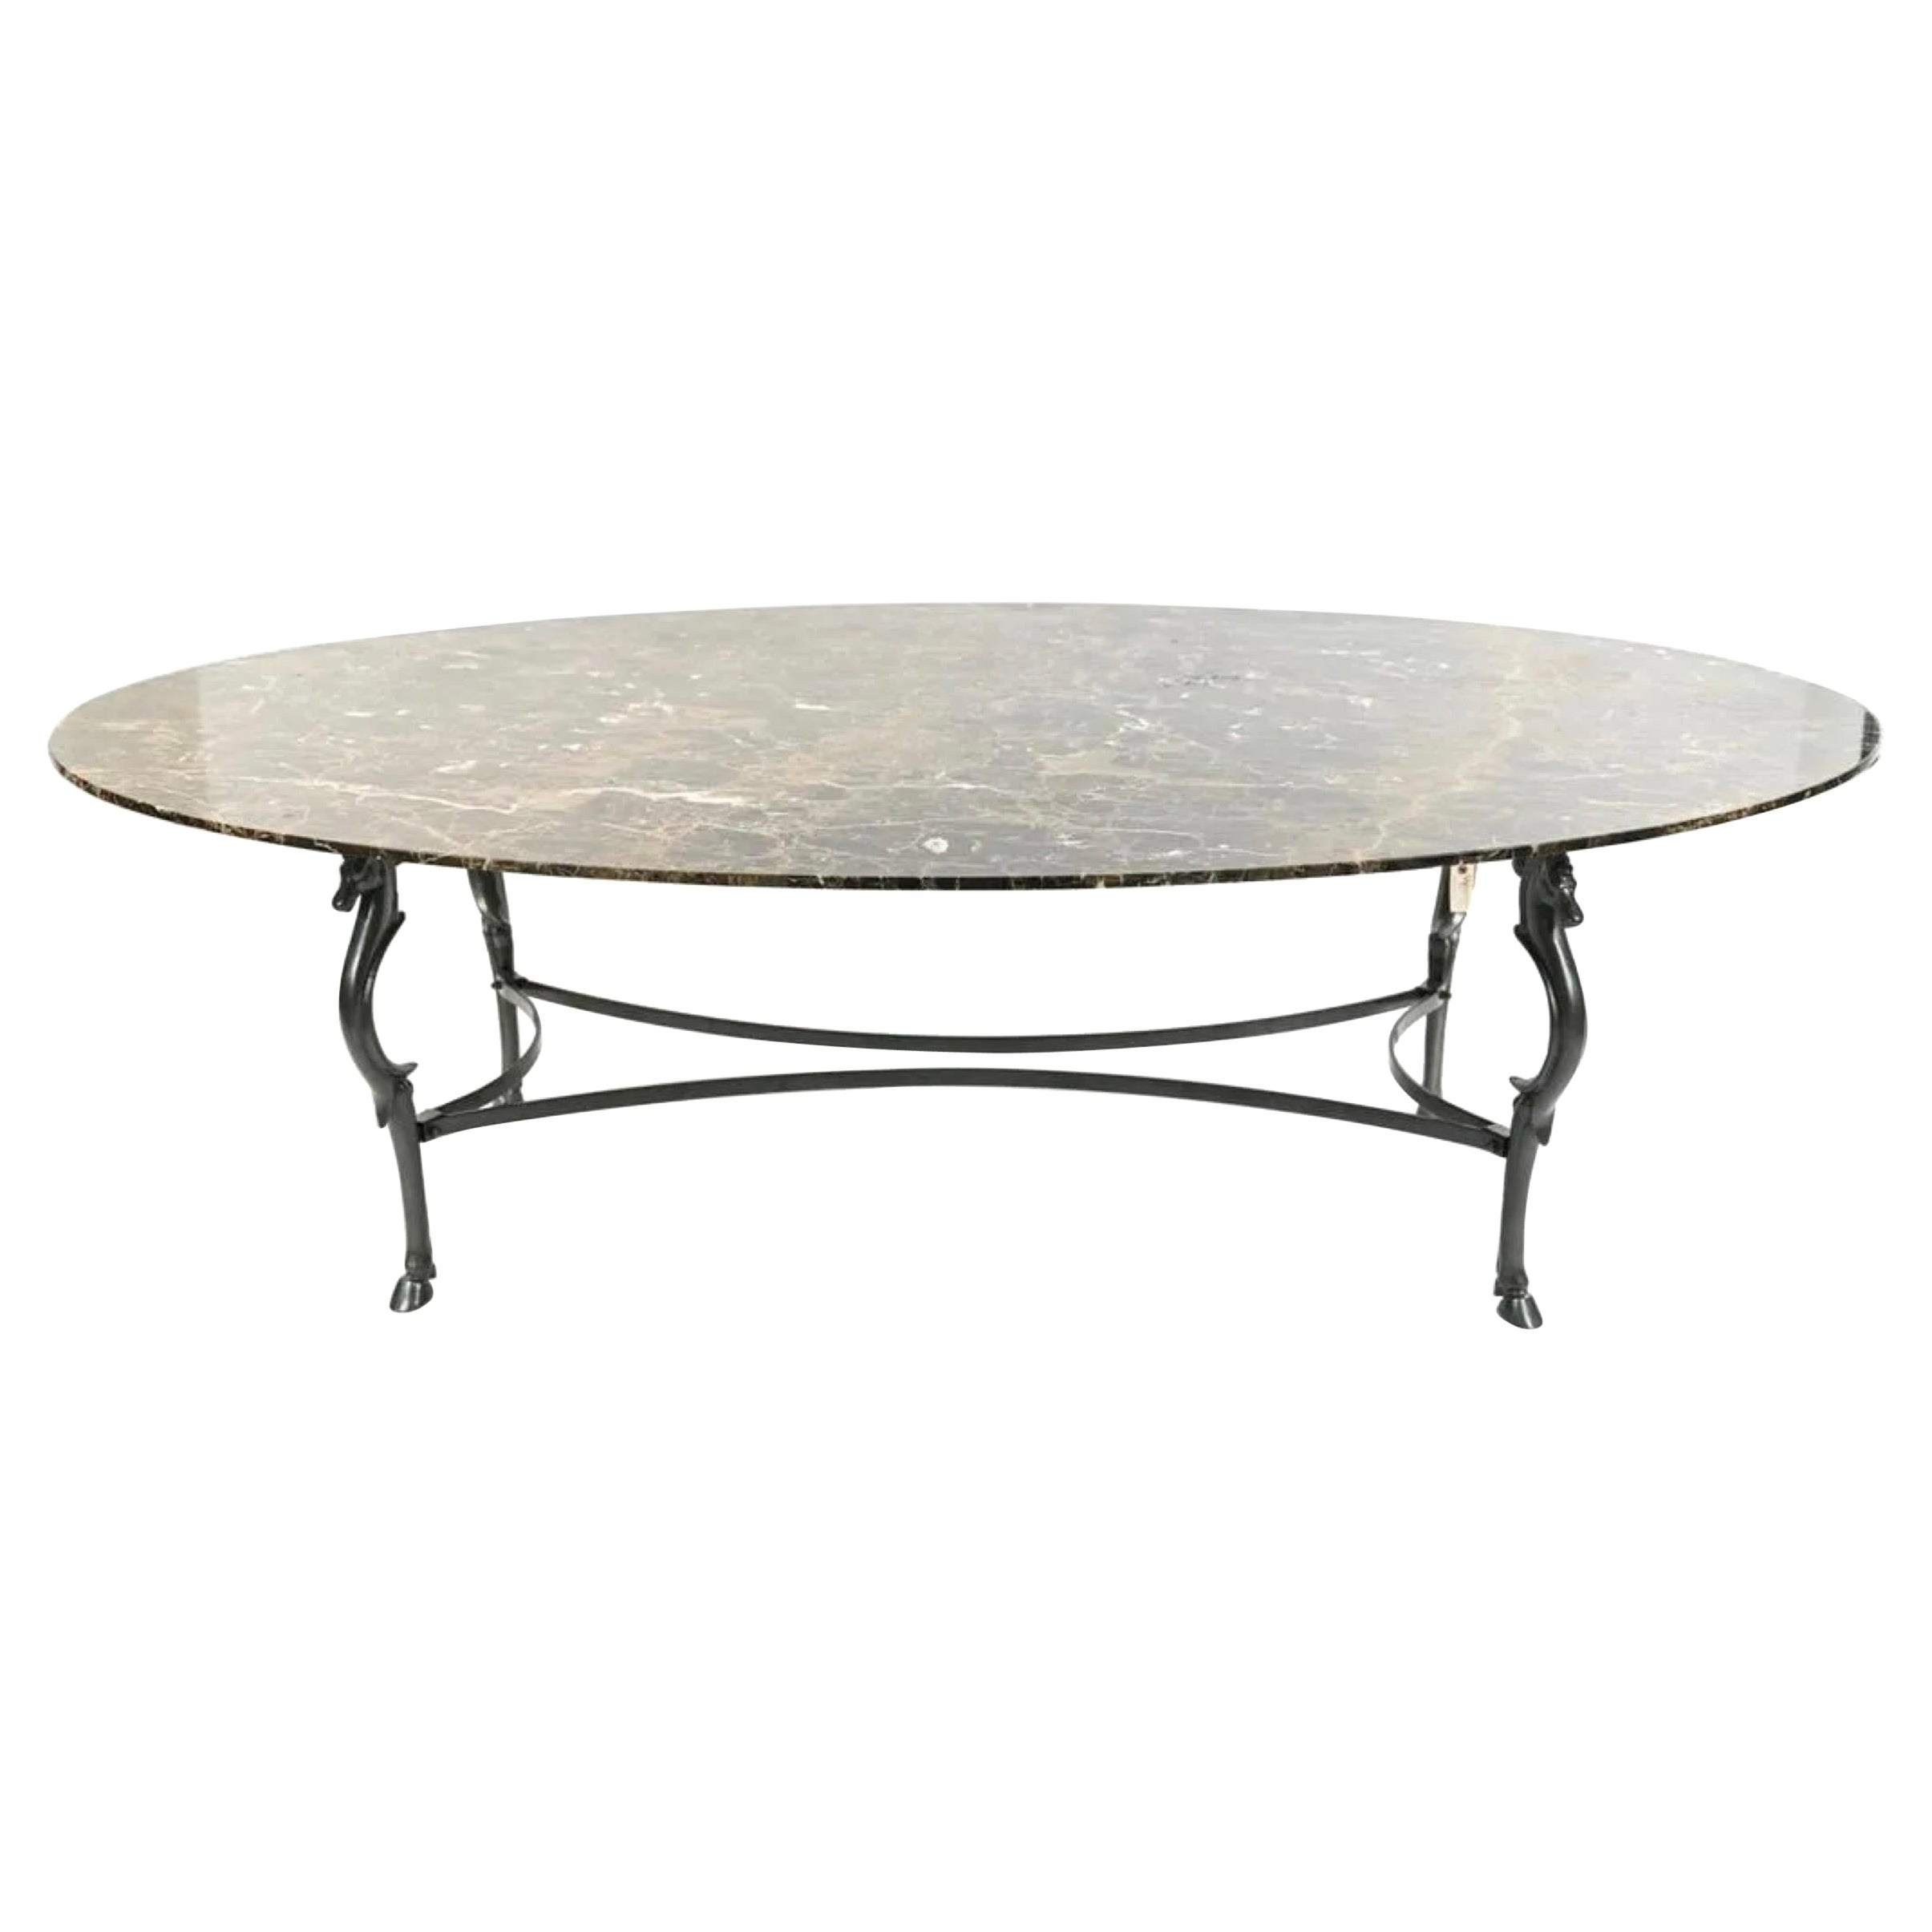 Neoclassical Style Oval Marble Top Dining Table